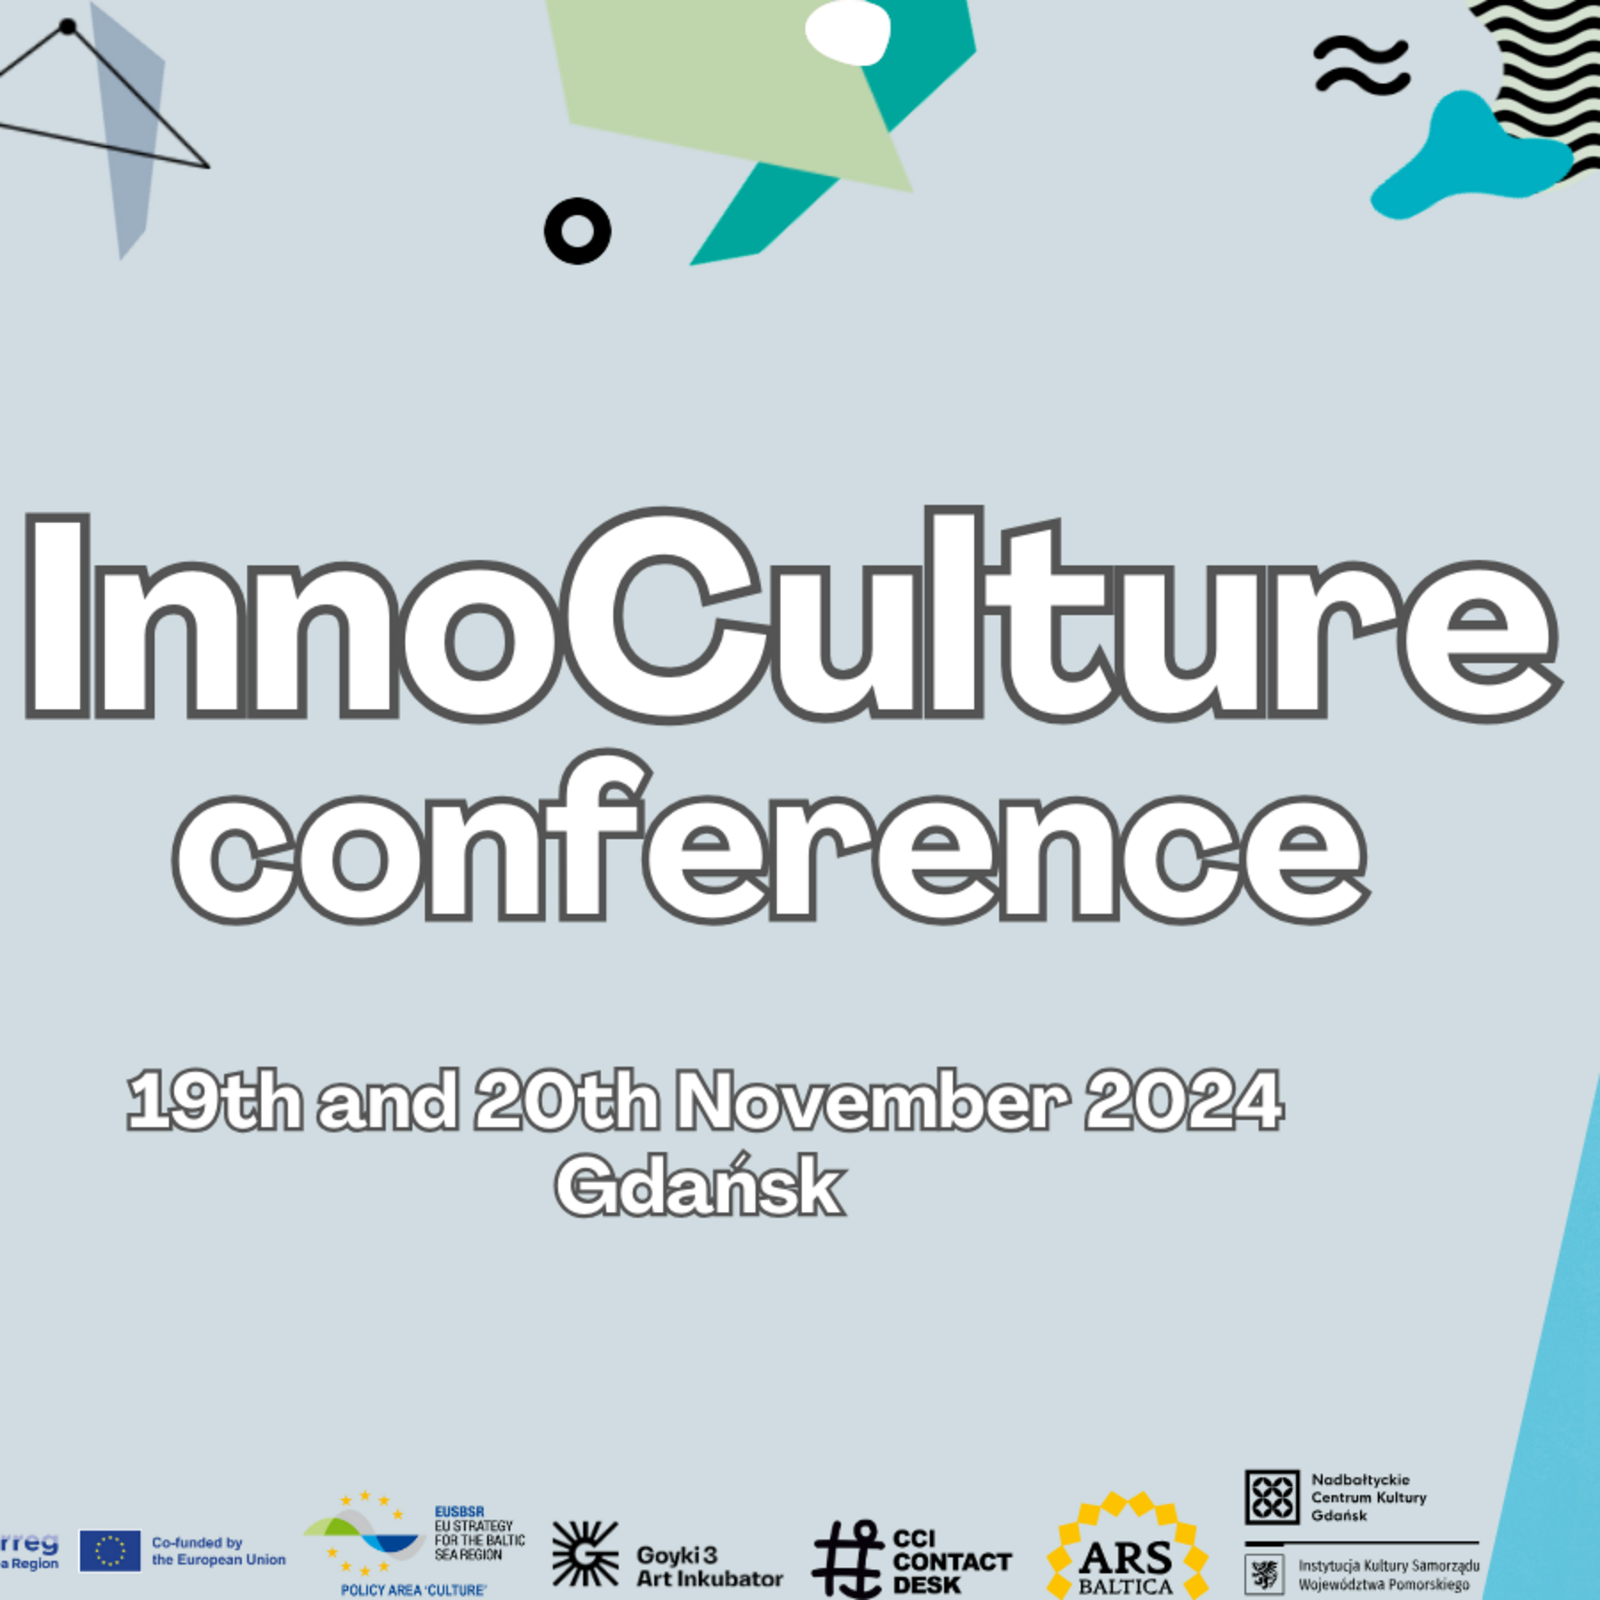 Decorative image advertising the InnoCulture Conference with partner logos